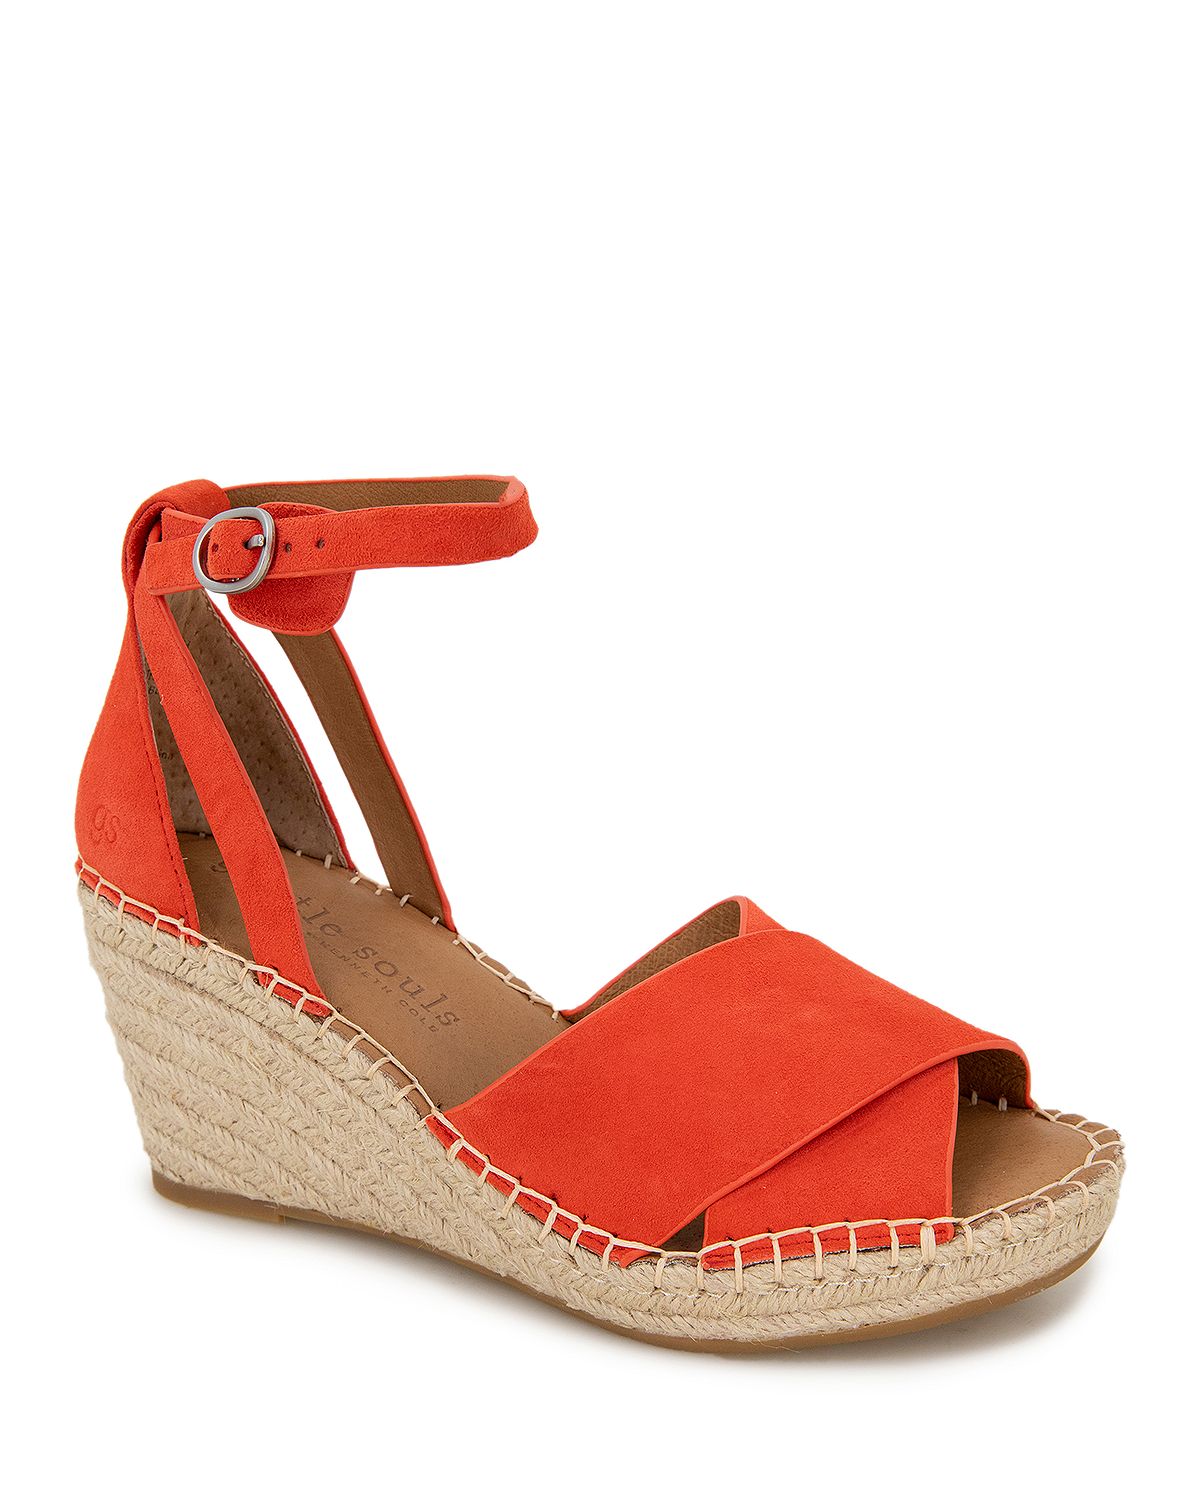 Photo 1 of Women's Charli Ankle Strap Espadrille Wedge Sandals SIZE 5.5M 